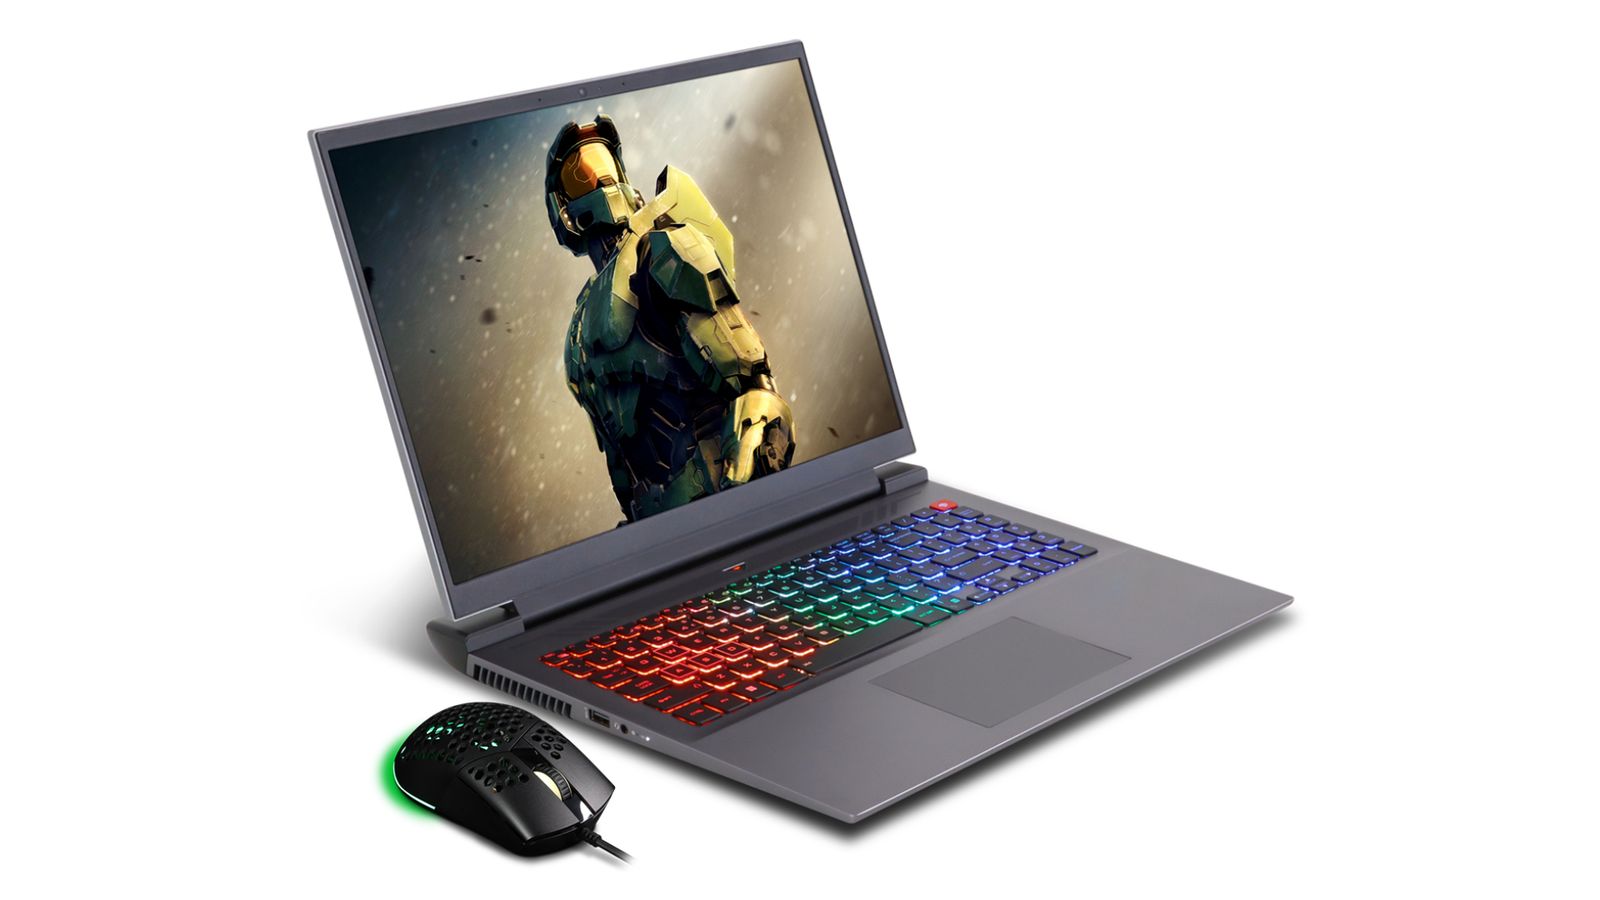 Chillblast Defiant product image of a dark grey laptop with multicoloured back-lit keys and the Halo Master Chief on the display.